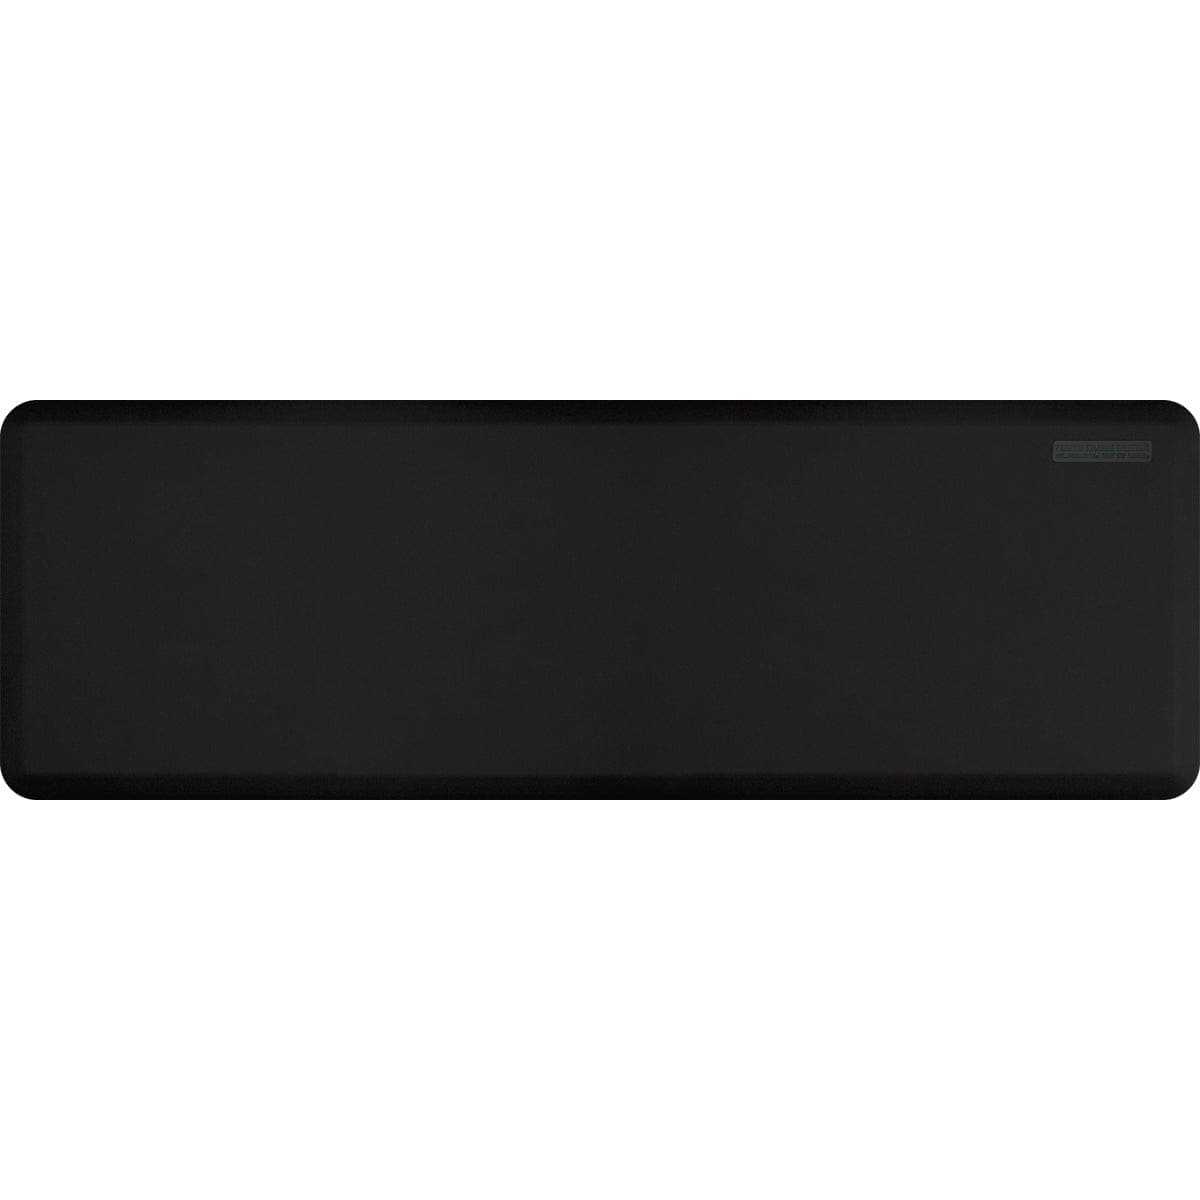 WellnessMats All WellnessMats WellnessMats Original Collection - Black